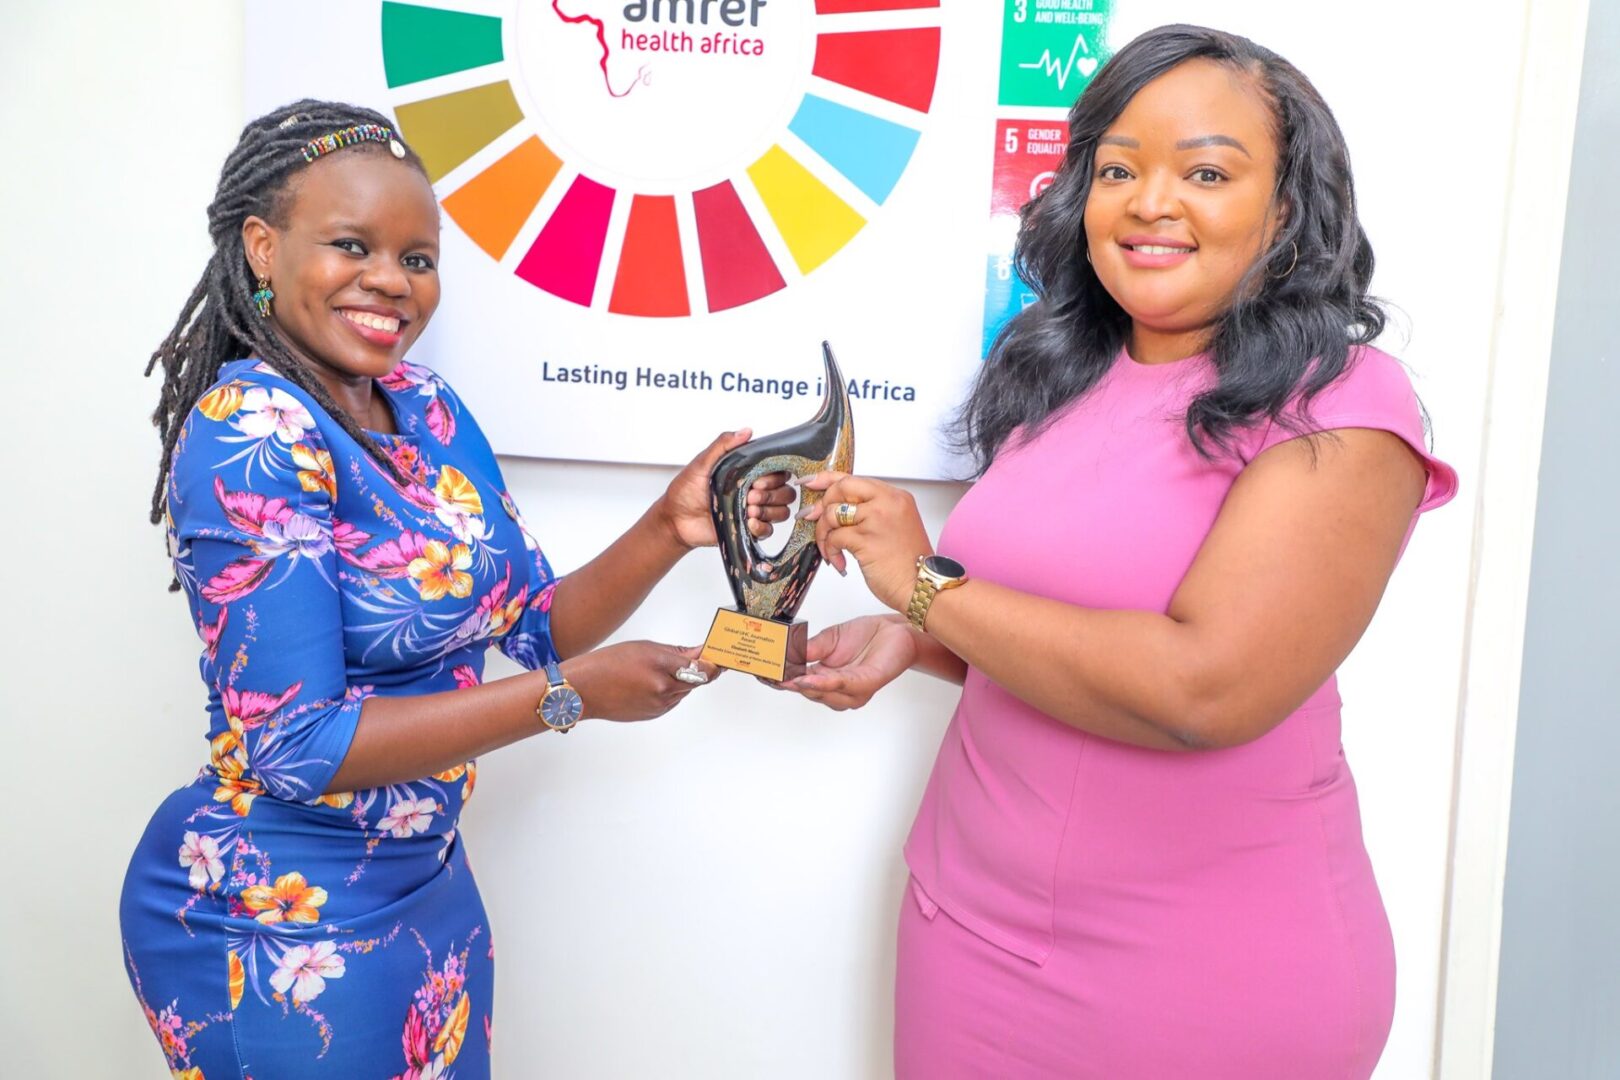 Ms Elizabeth Merab (L), a Multimedia Health & Science Journalist receiving this year’s Global Universal Health Coverage (GUHC) Award for her efforts in health journalism in Africa. PHOTO/Courtesy.